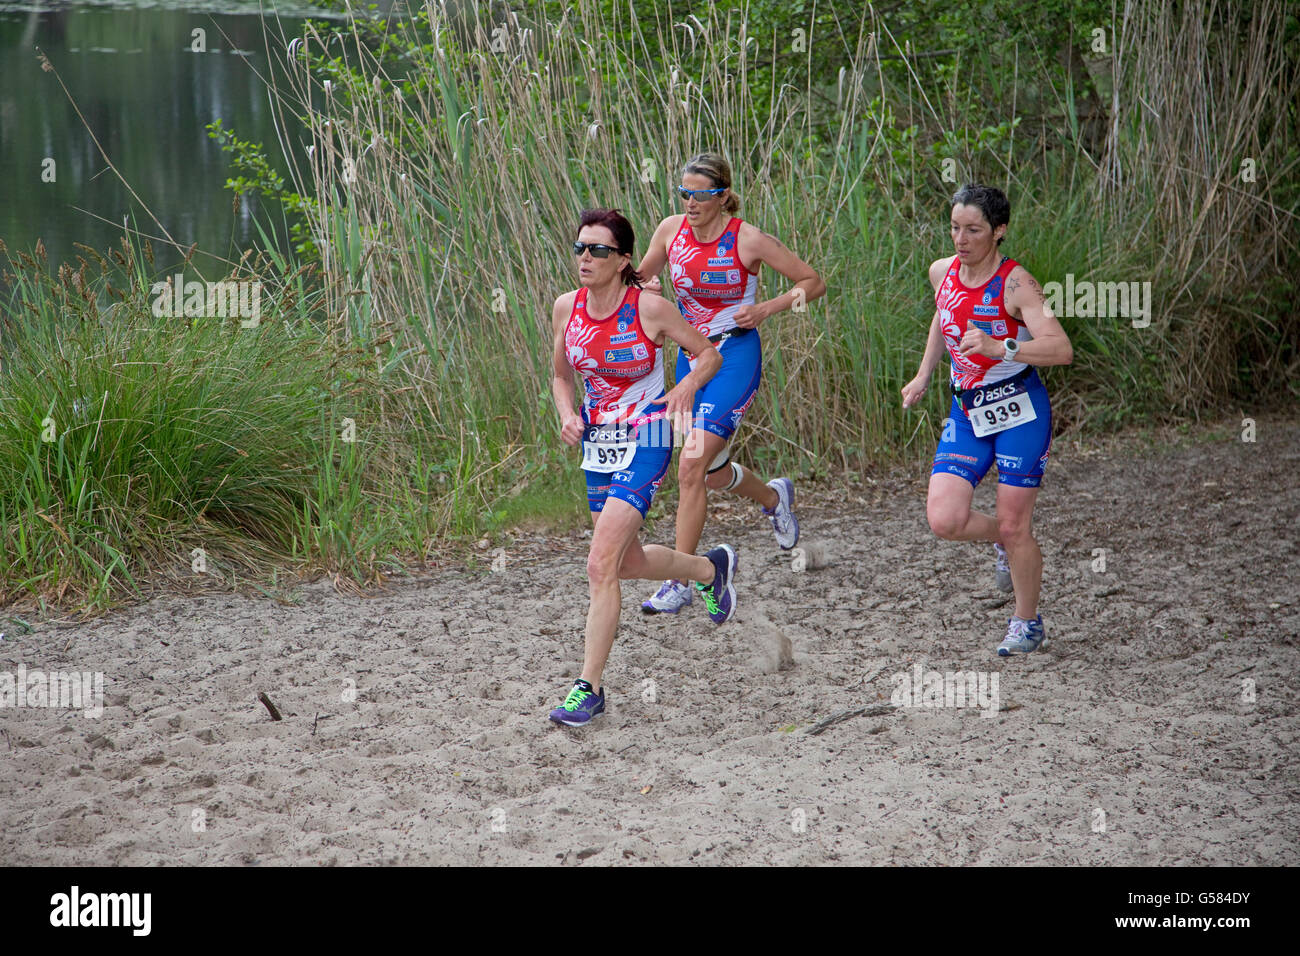 Team of three runners competing in Triathlon of Mimizam France Stock Photo